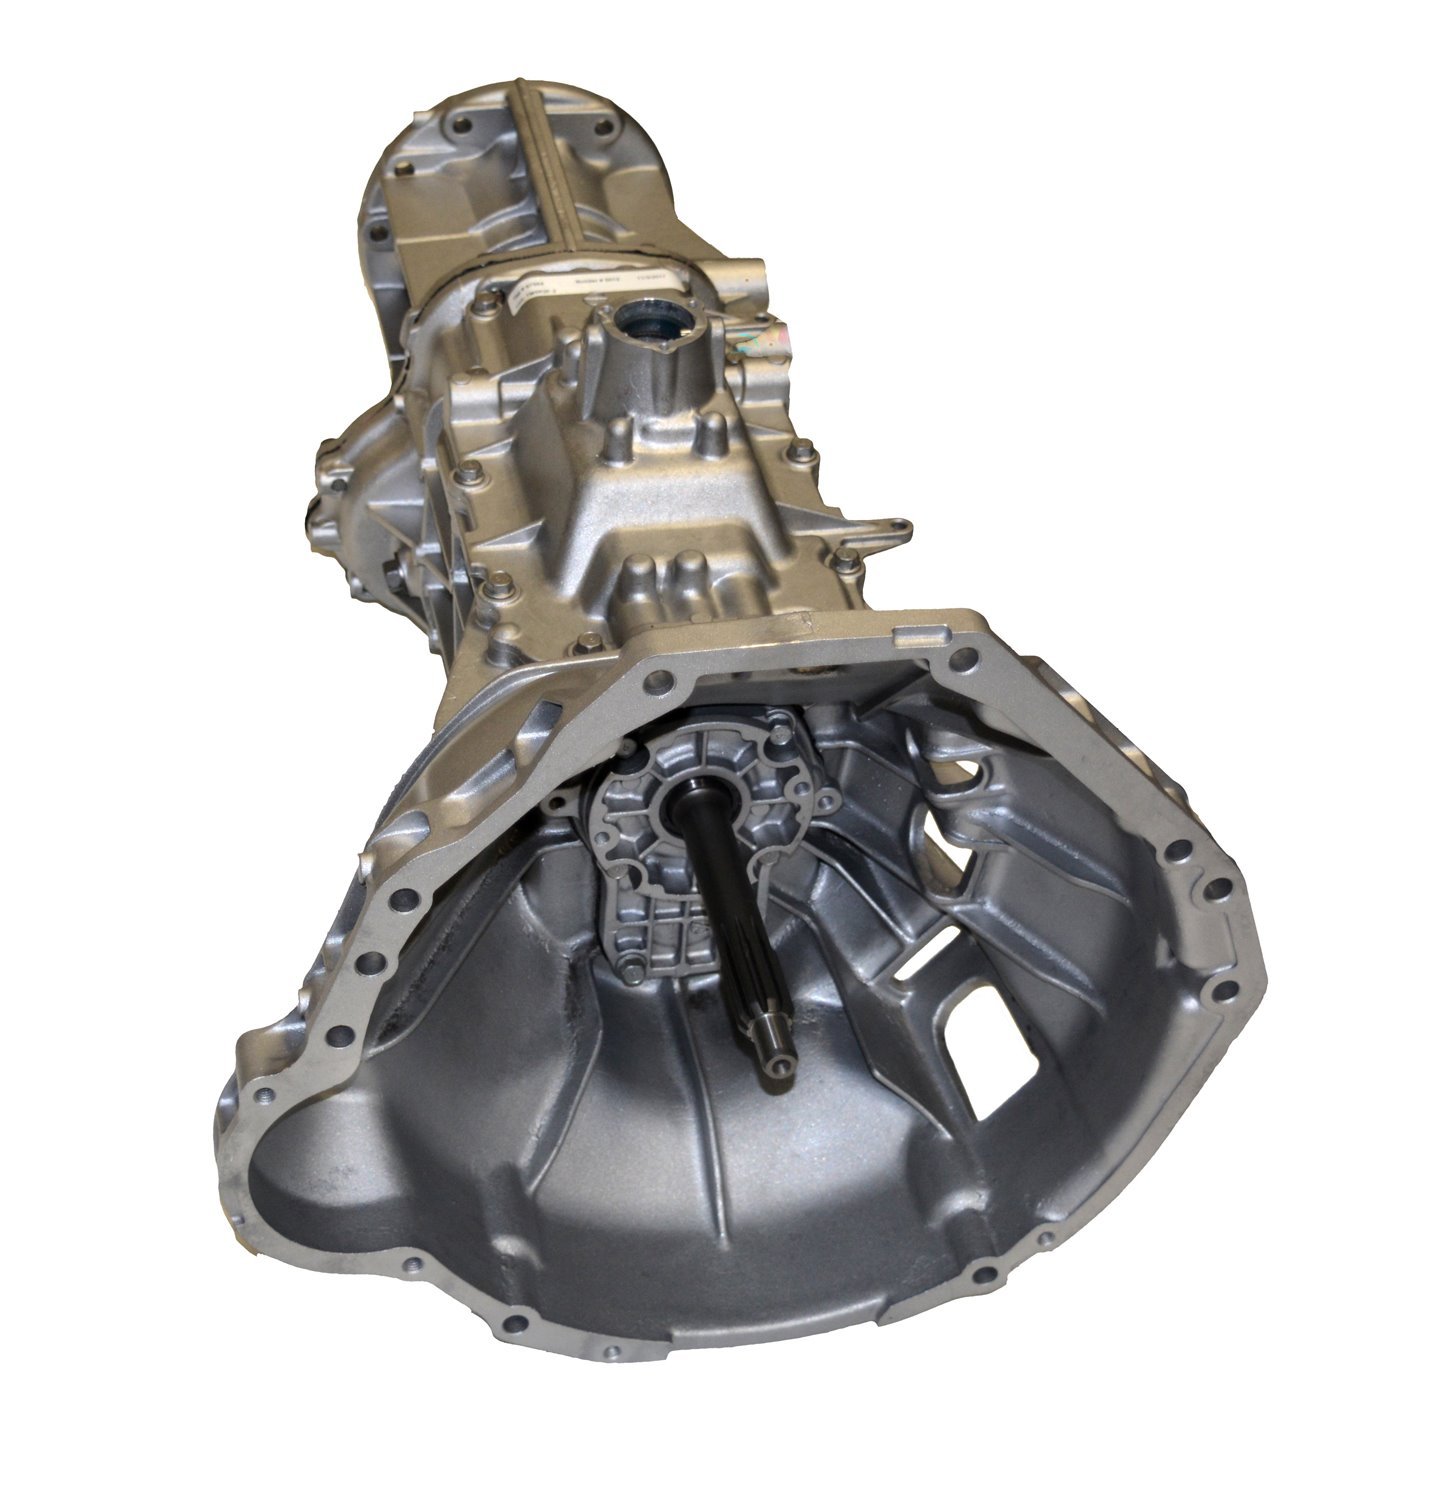 RMTM5R2F-2 Remanufactured Manual Transmission for Ford 1988-1996 F150/F250, 5-Speed